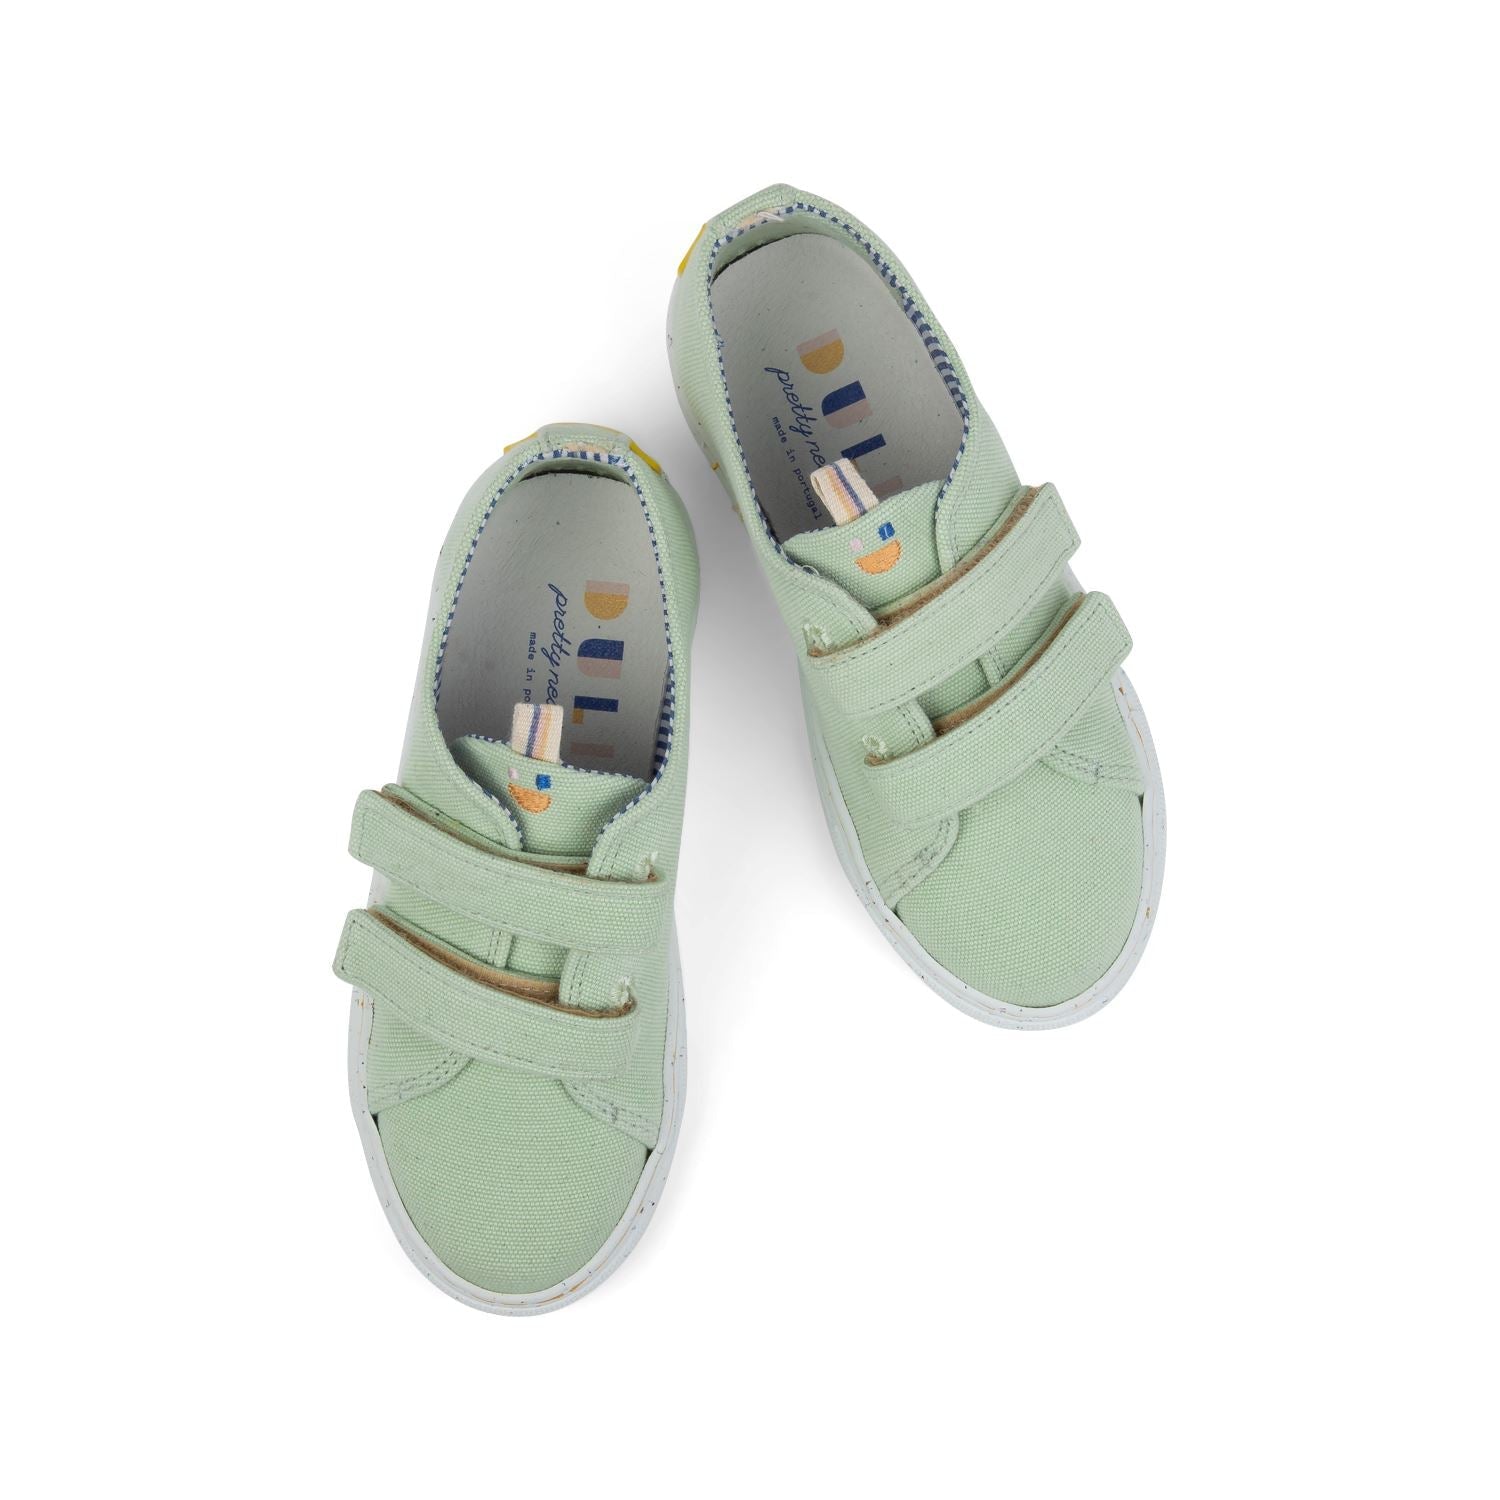 Anis Eco Strap Sneakers Shoes Dulis Shoes 